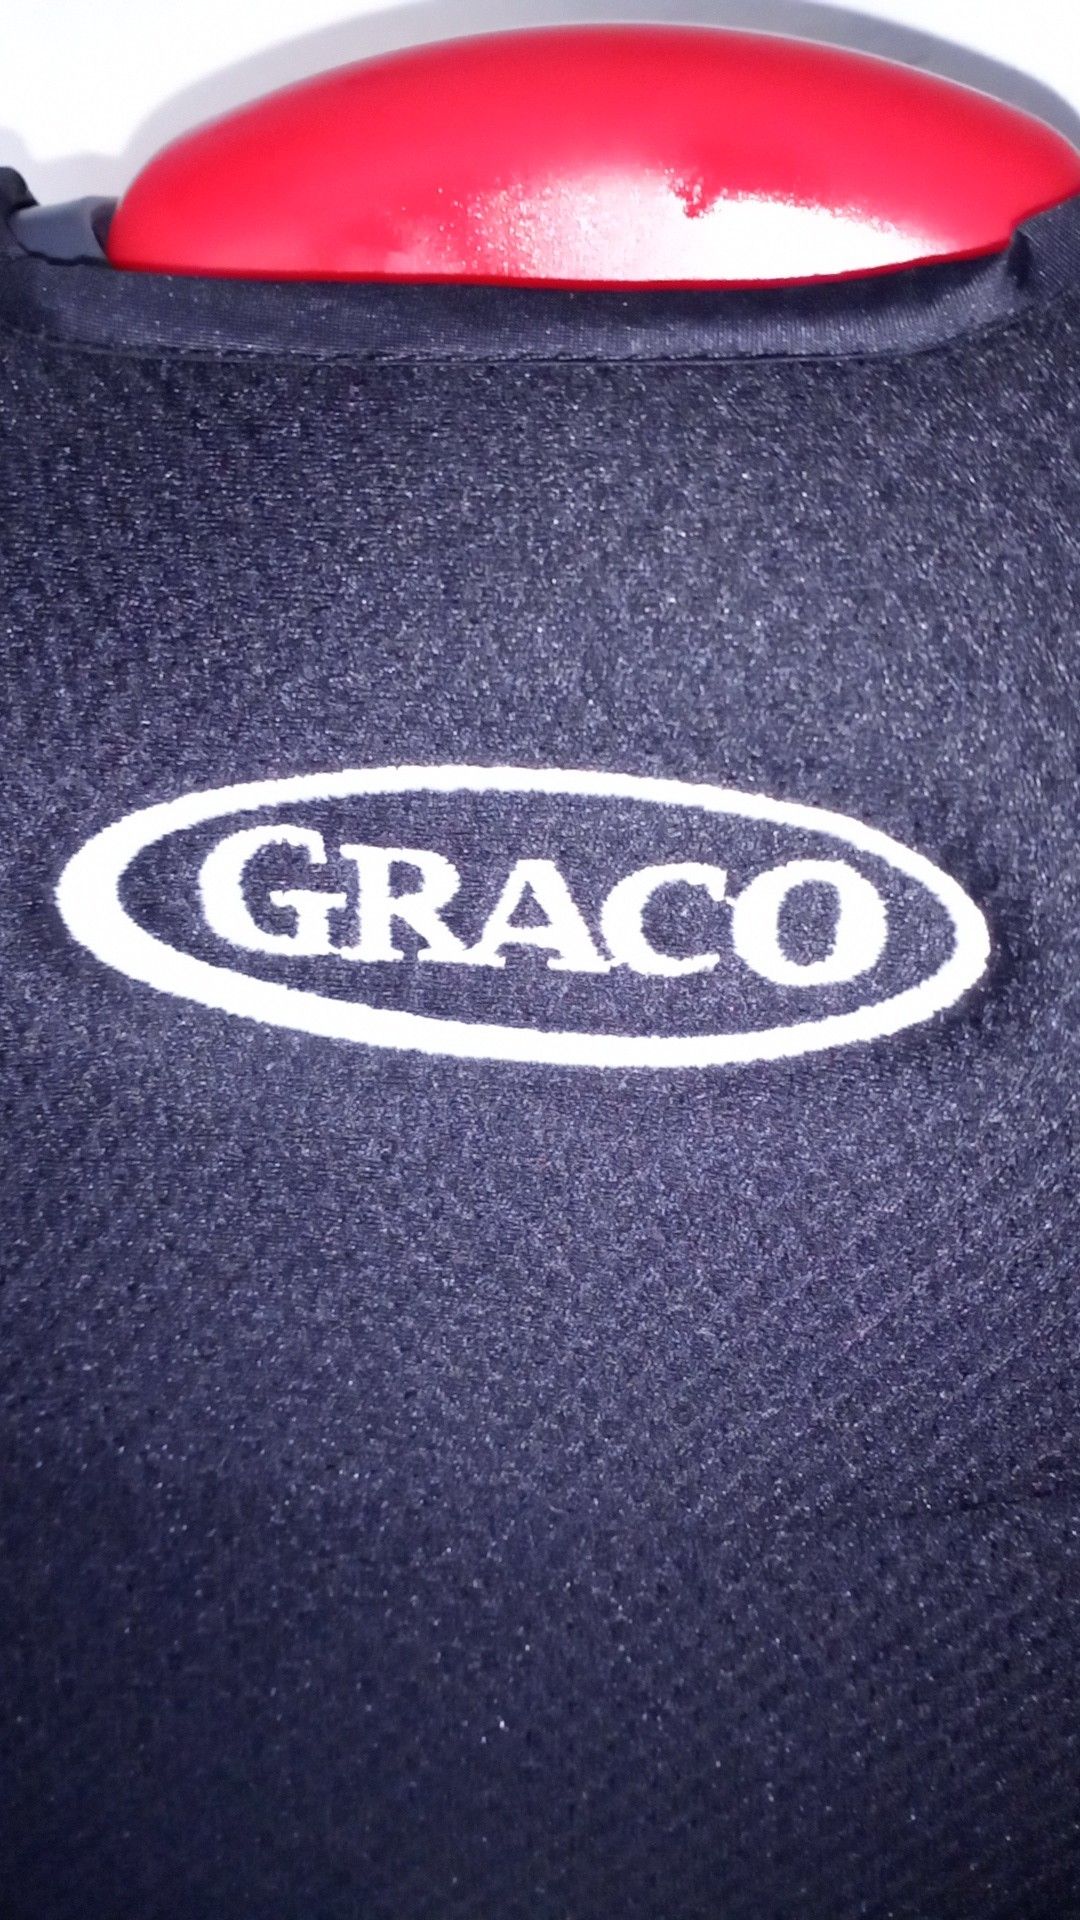 Graco booster seat